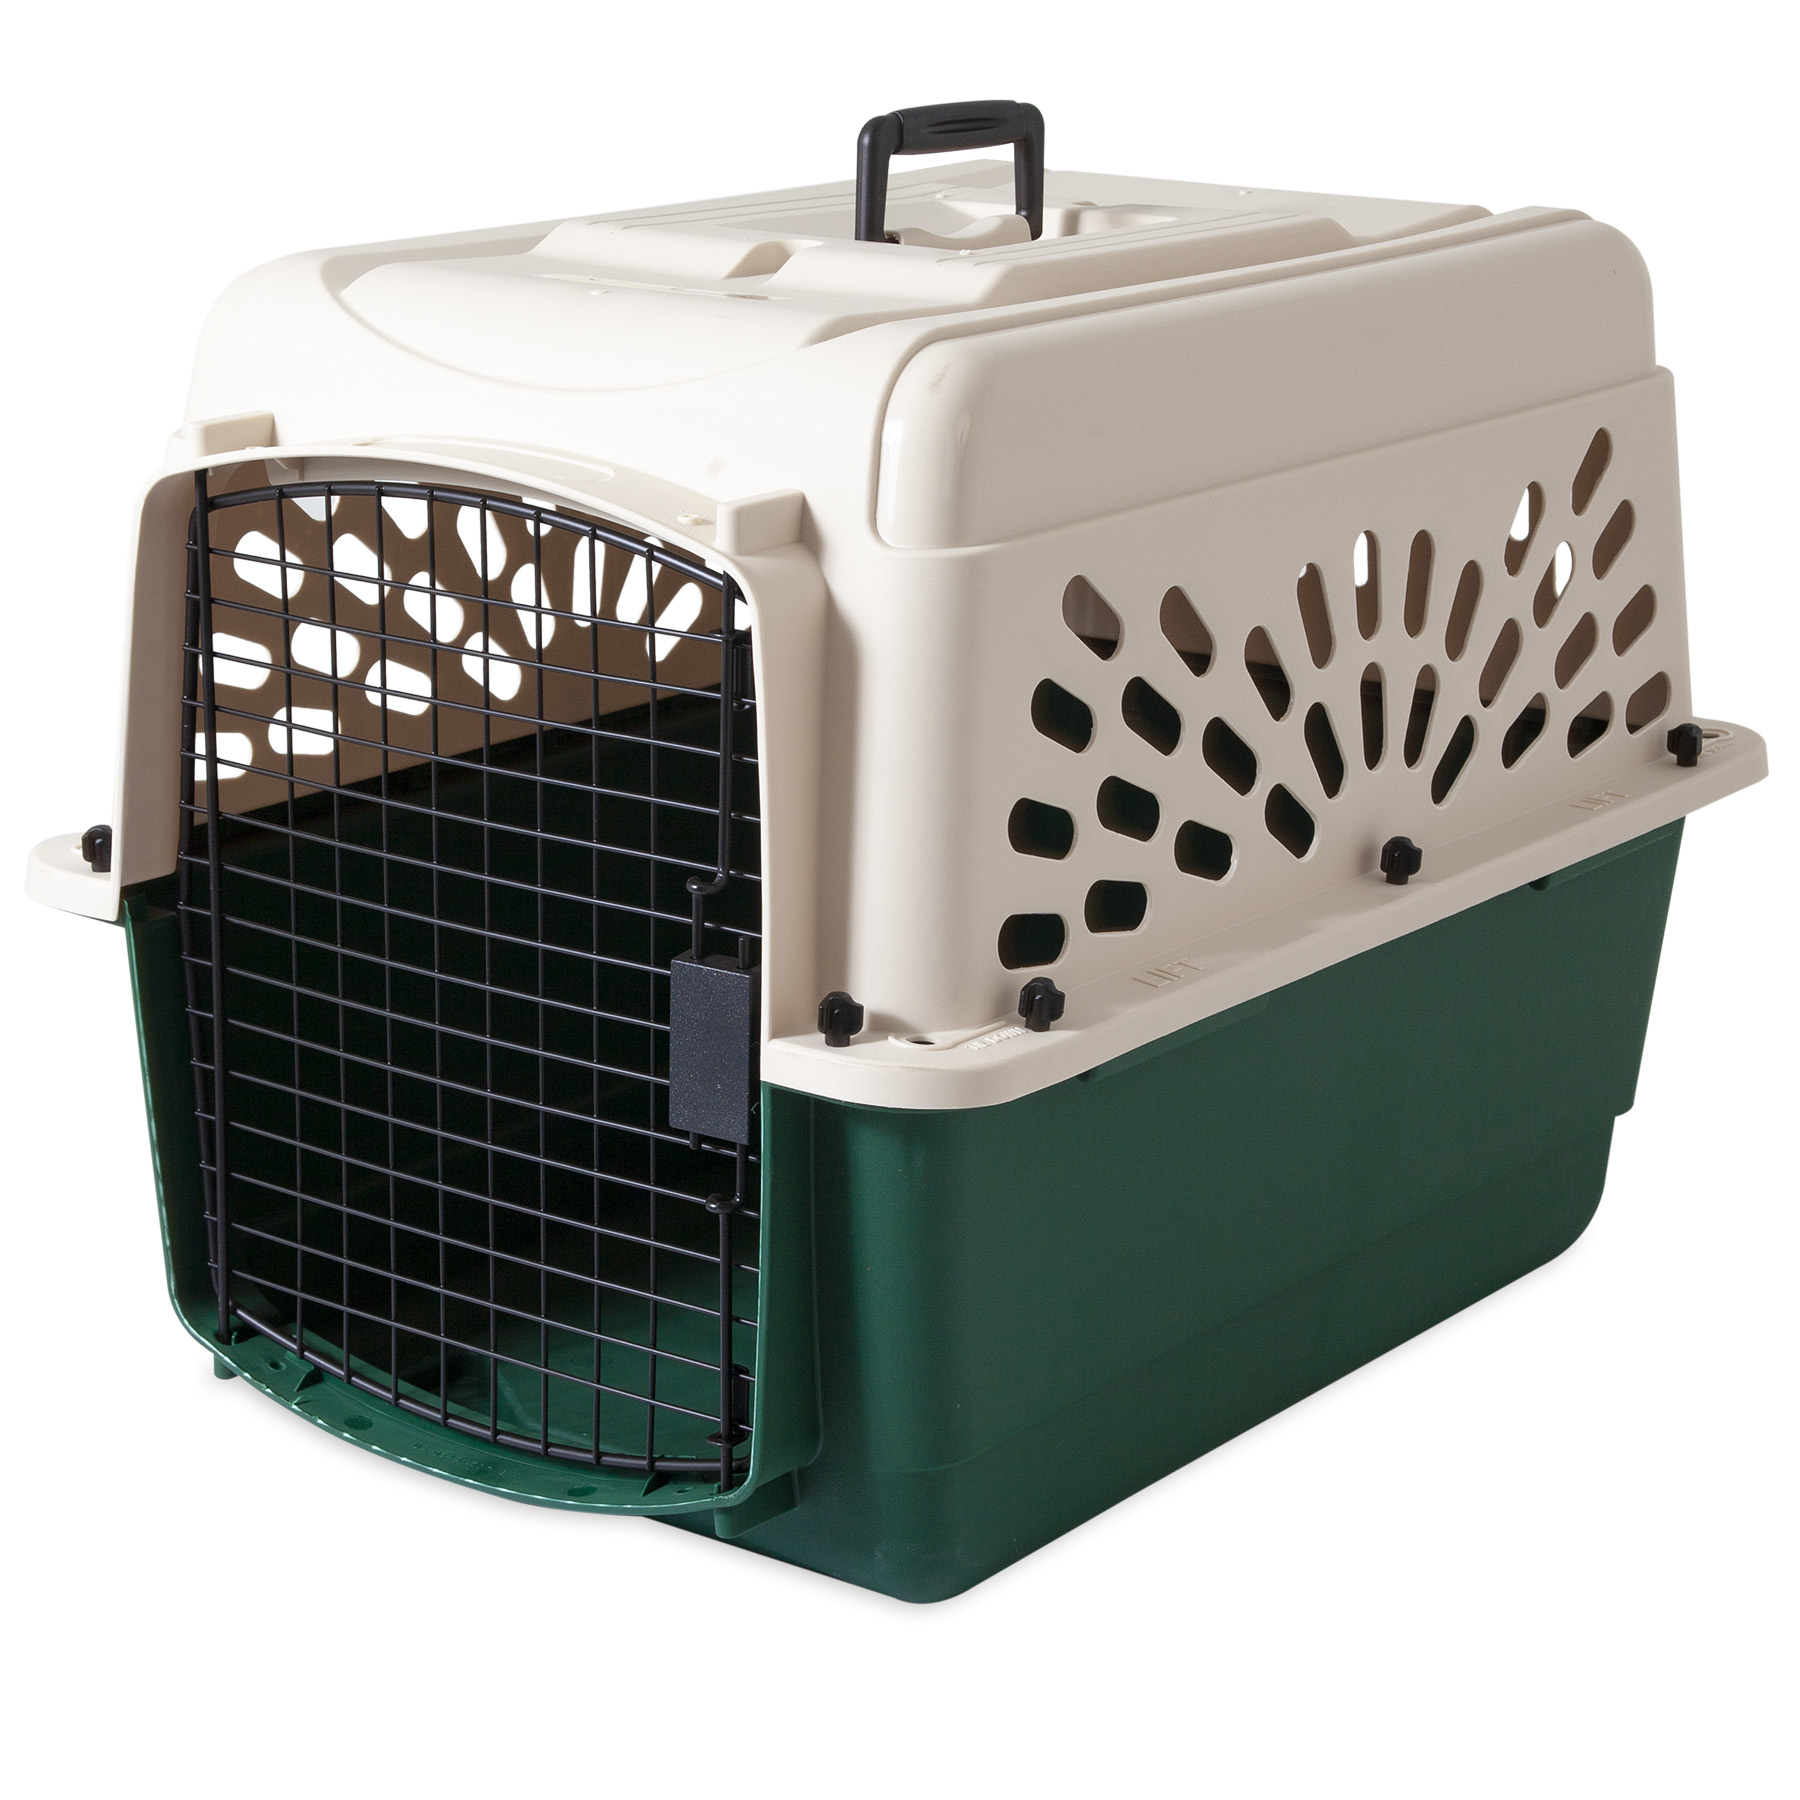 Petmate Ruffmaxx 28" Portable Dog Kennel Plastoc Pet Carrier for Dogs 20 to 30 lb, Tan/Green - image 1 of 9